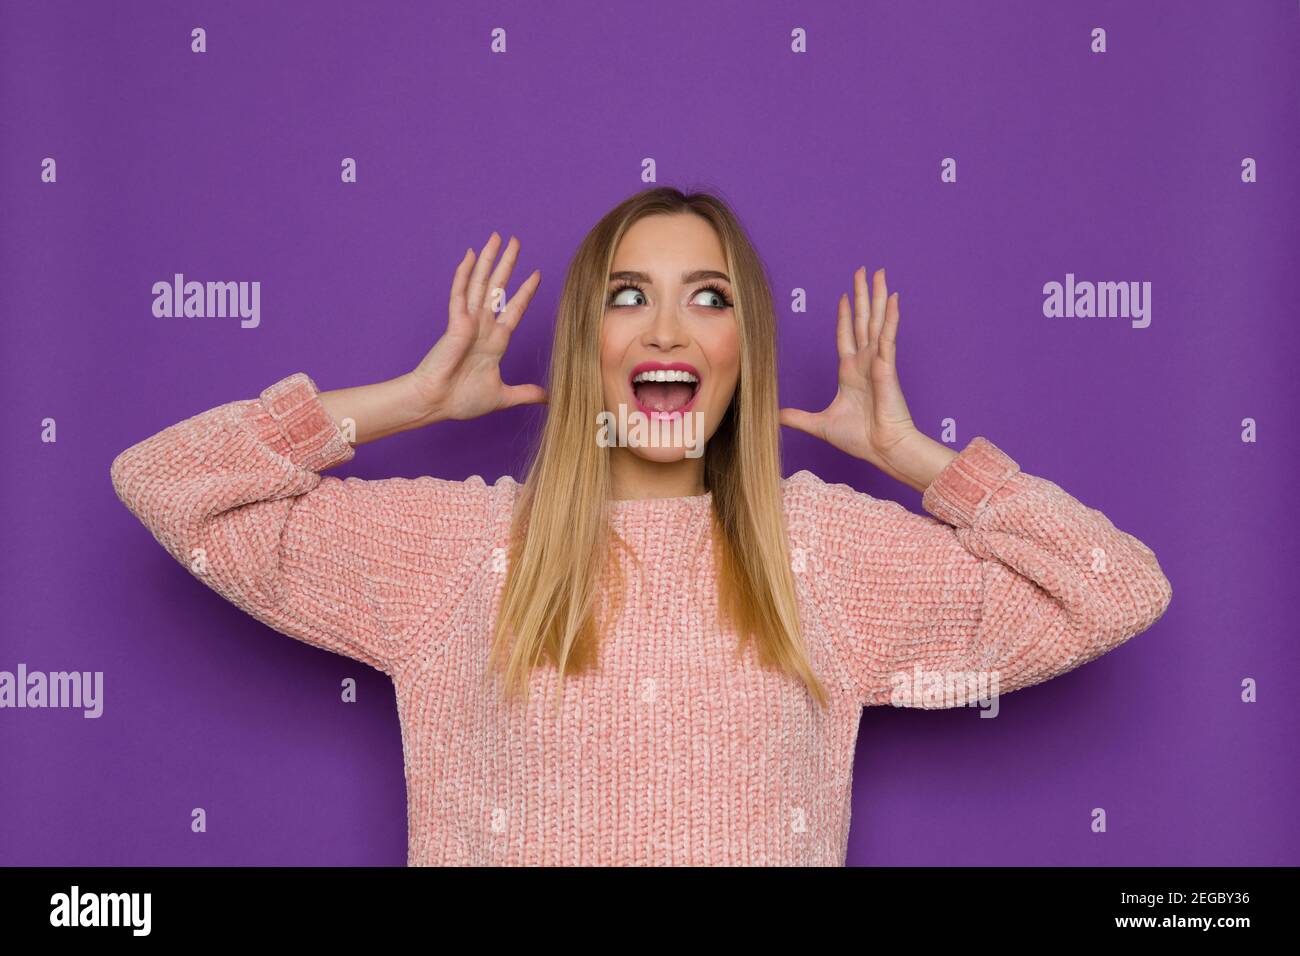 Happy young woman in pink sweater is holding head in hands, looking at the side and shouting. Front view. Waist up studio shot on purple background. Stock Photo